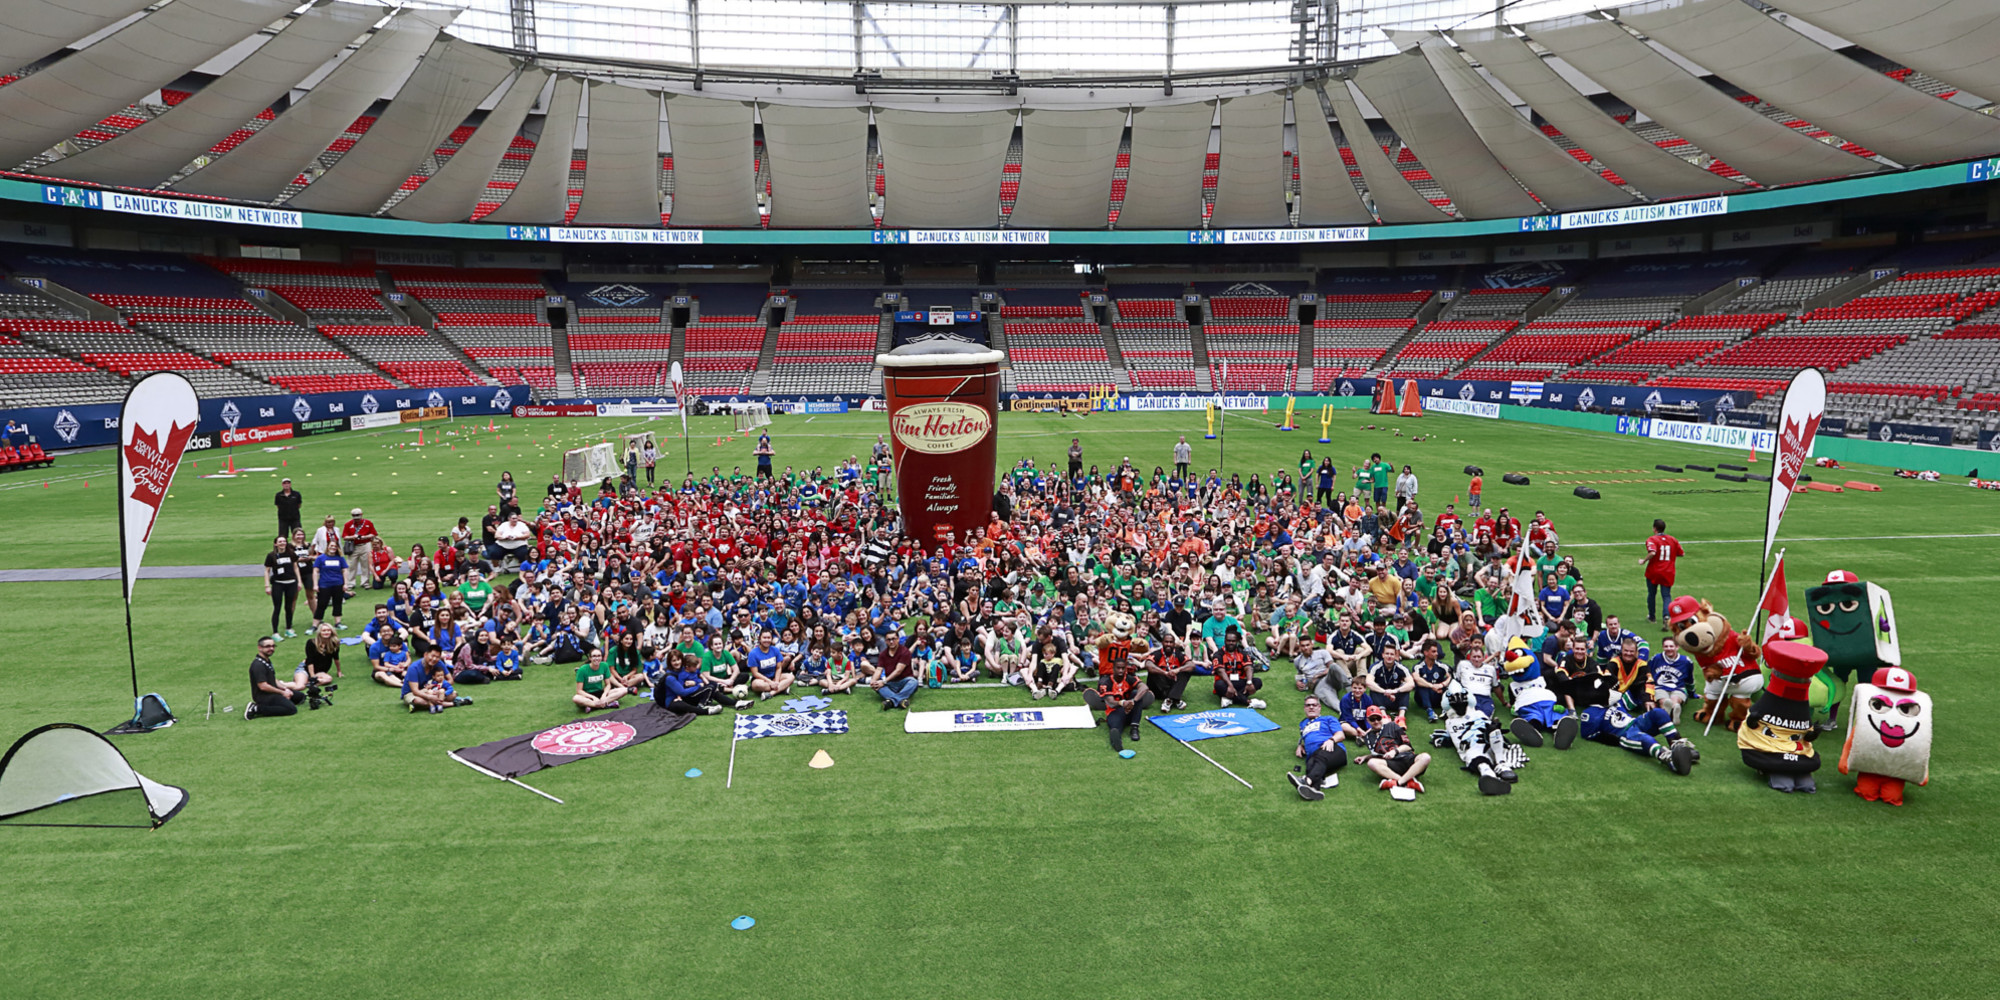 A group of 300+ families, staff, volunteers and professional athletes pose for a photo on-field at a sports stadium.